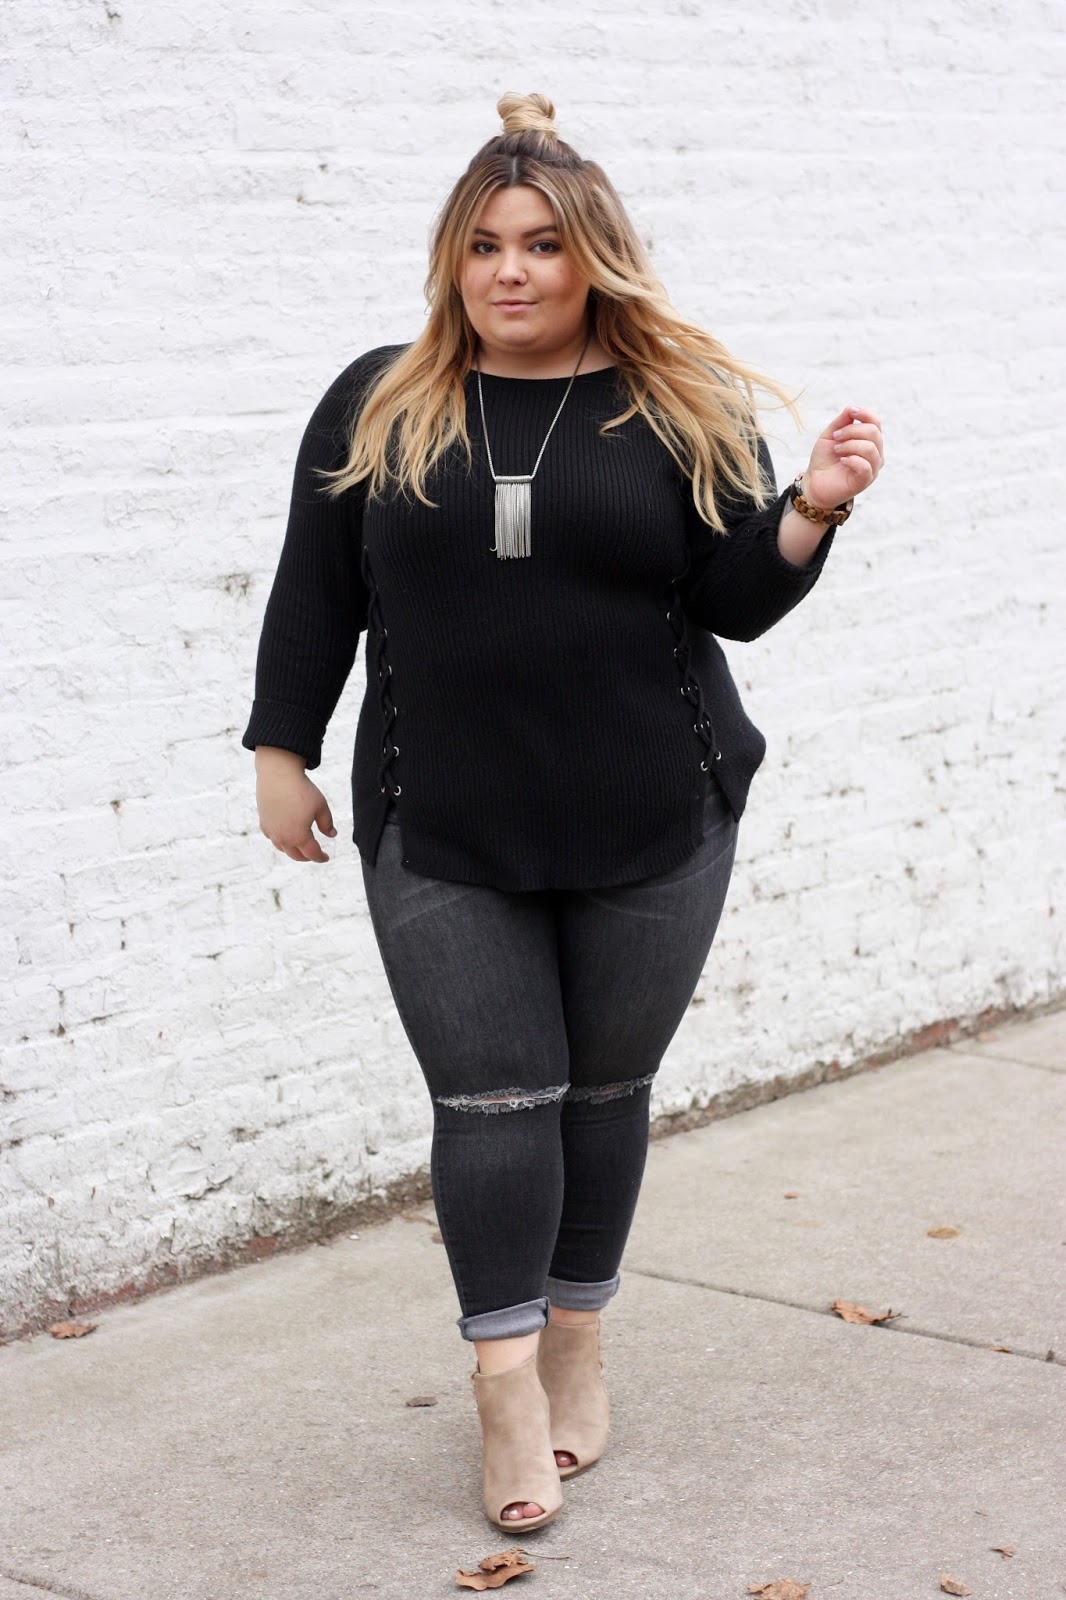 natalie craig, natalie in the city, plus size fashion, cute comfortable plus size outfit clothing, lace up sweaters, target mossimo denim, chicago blogger, midwest blogger, top knot, fatshion, eff your body standards,